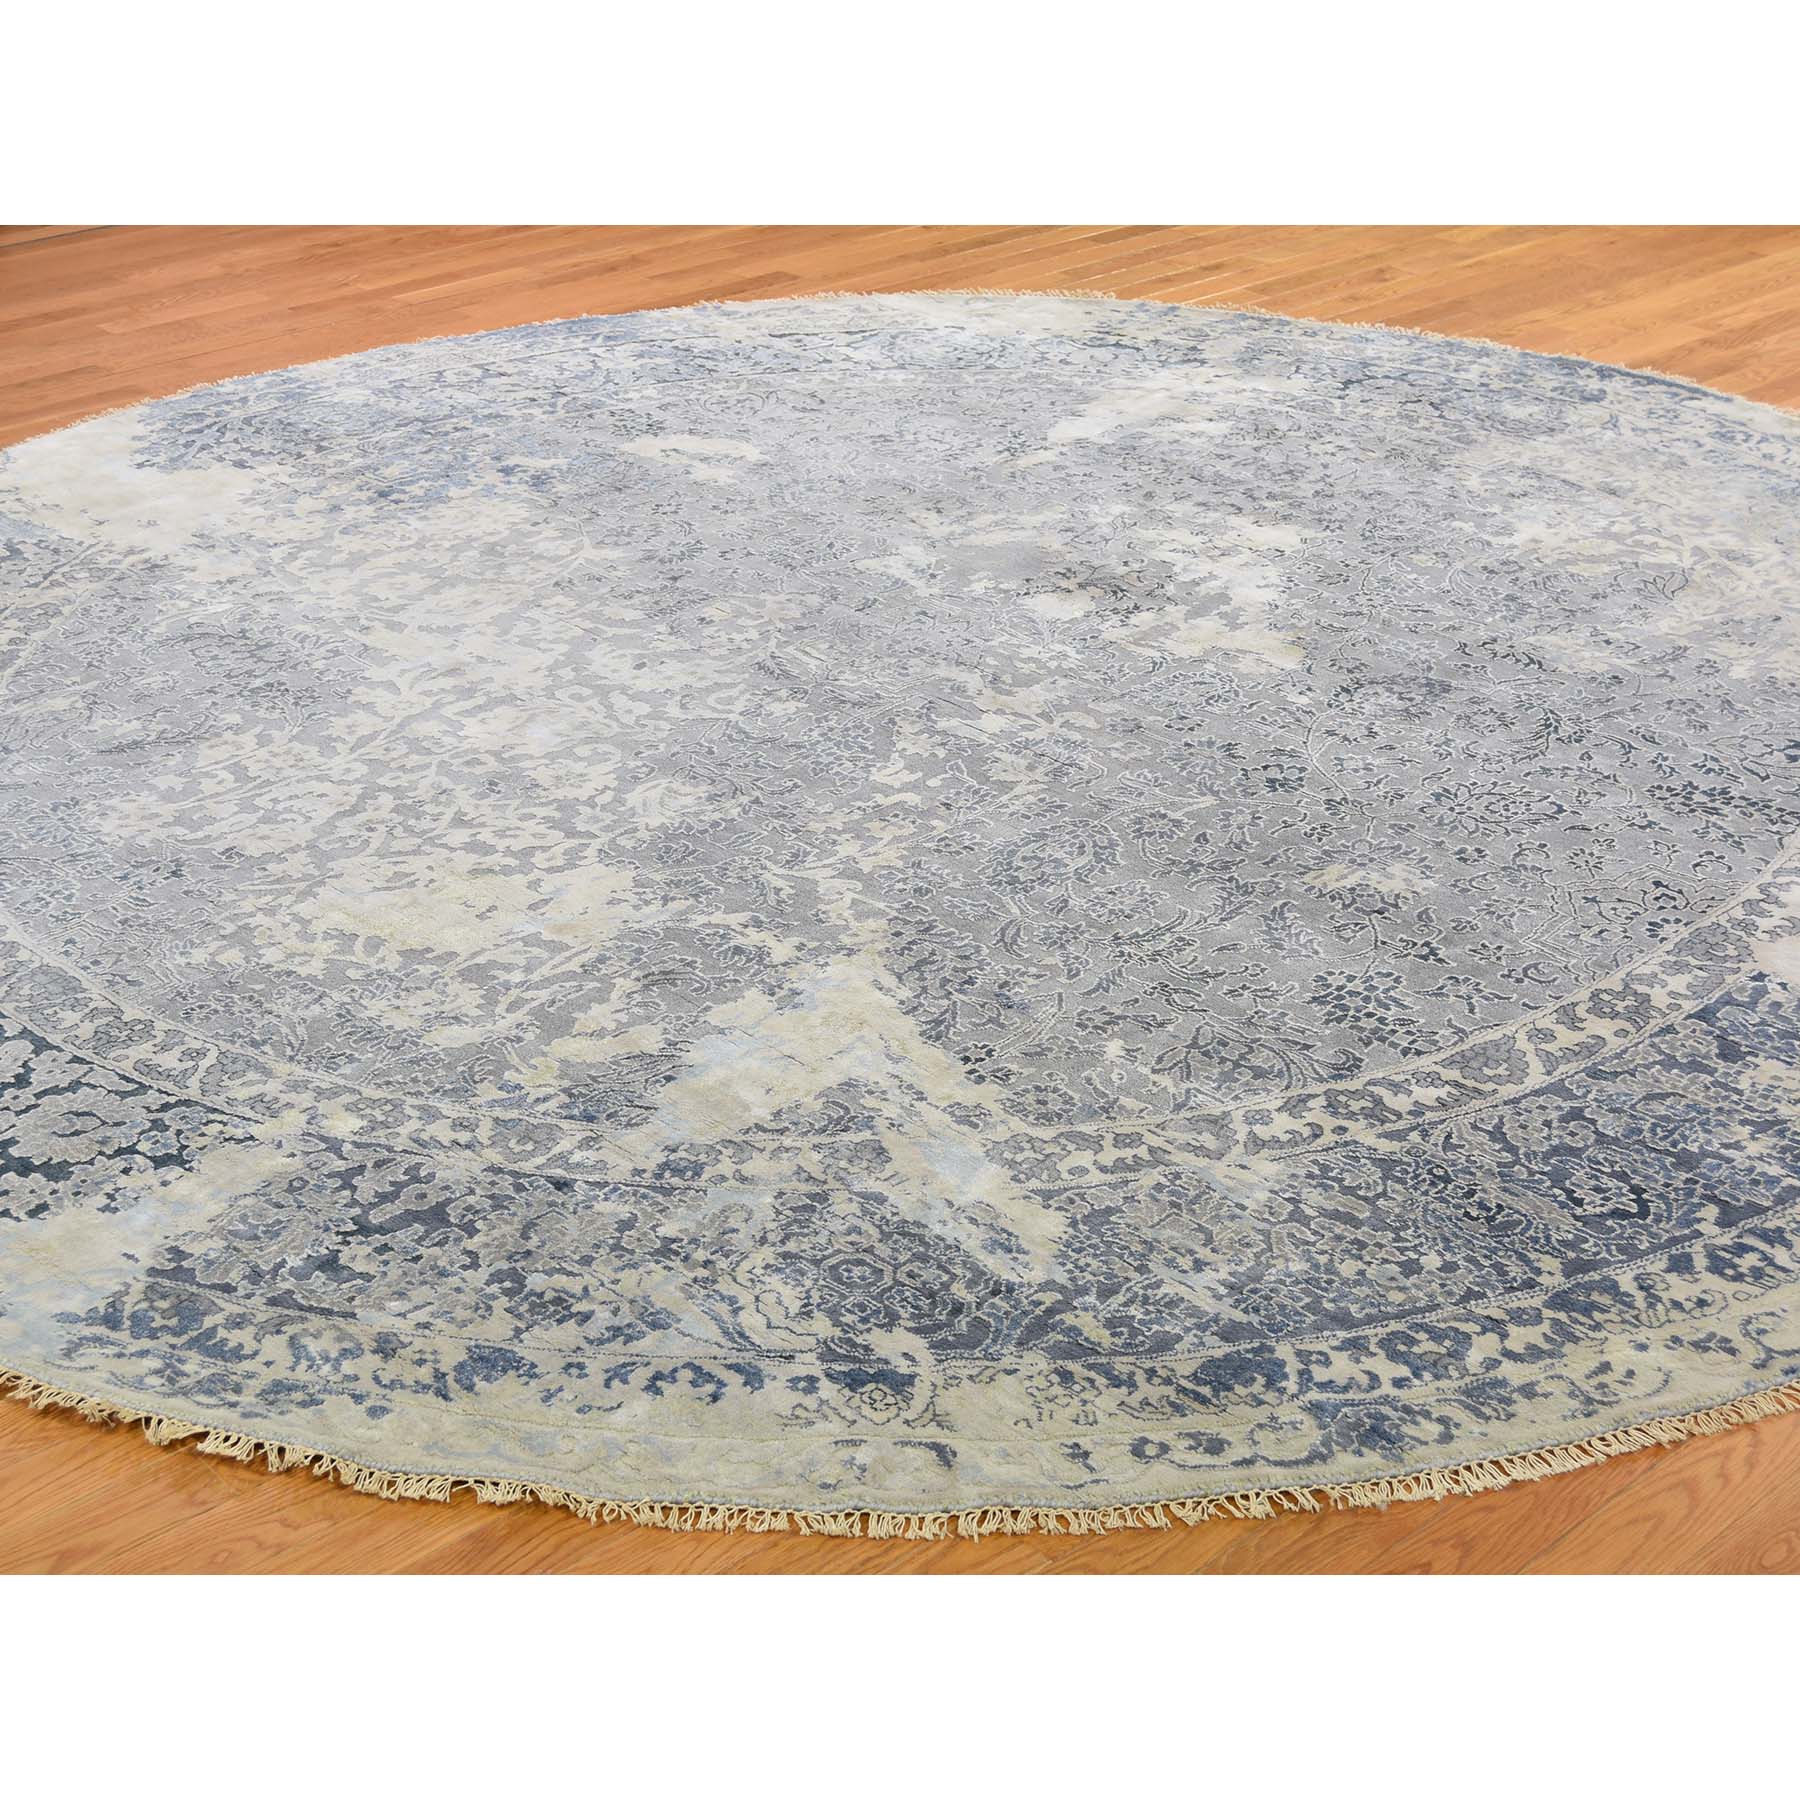 11-10 x11-10  Round Broken Persian Design With Pure Silk Hand-Knotted Oriental Rug 